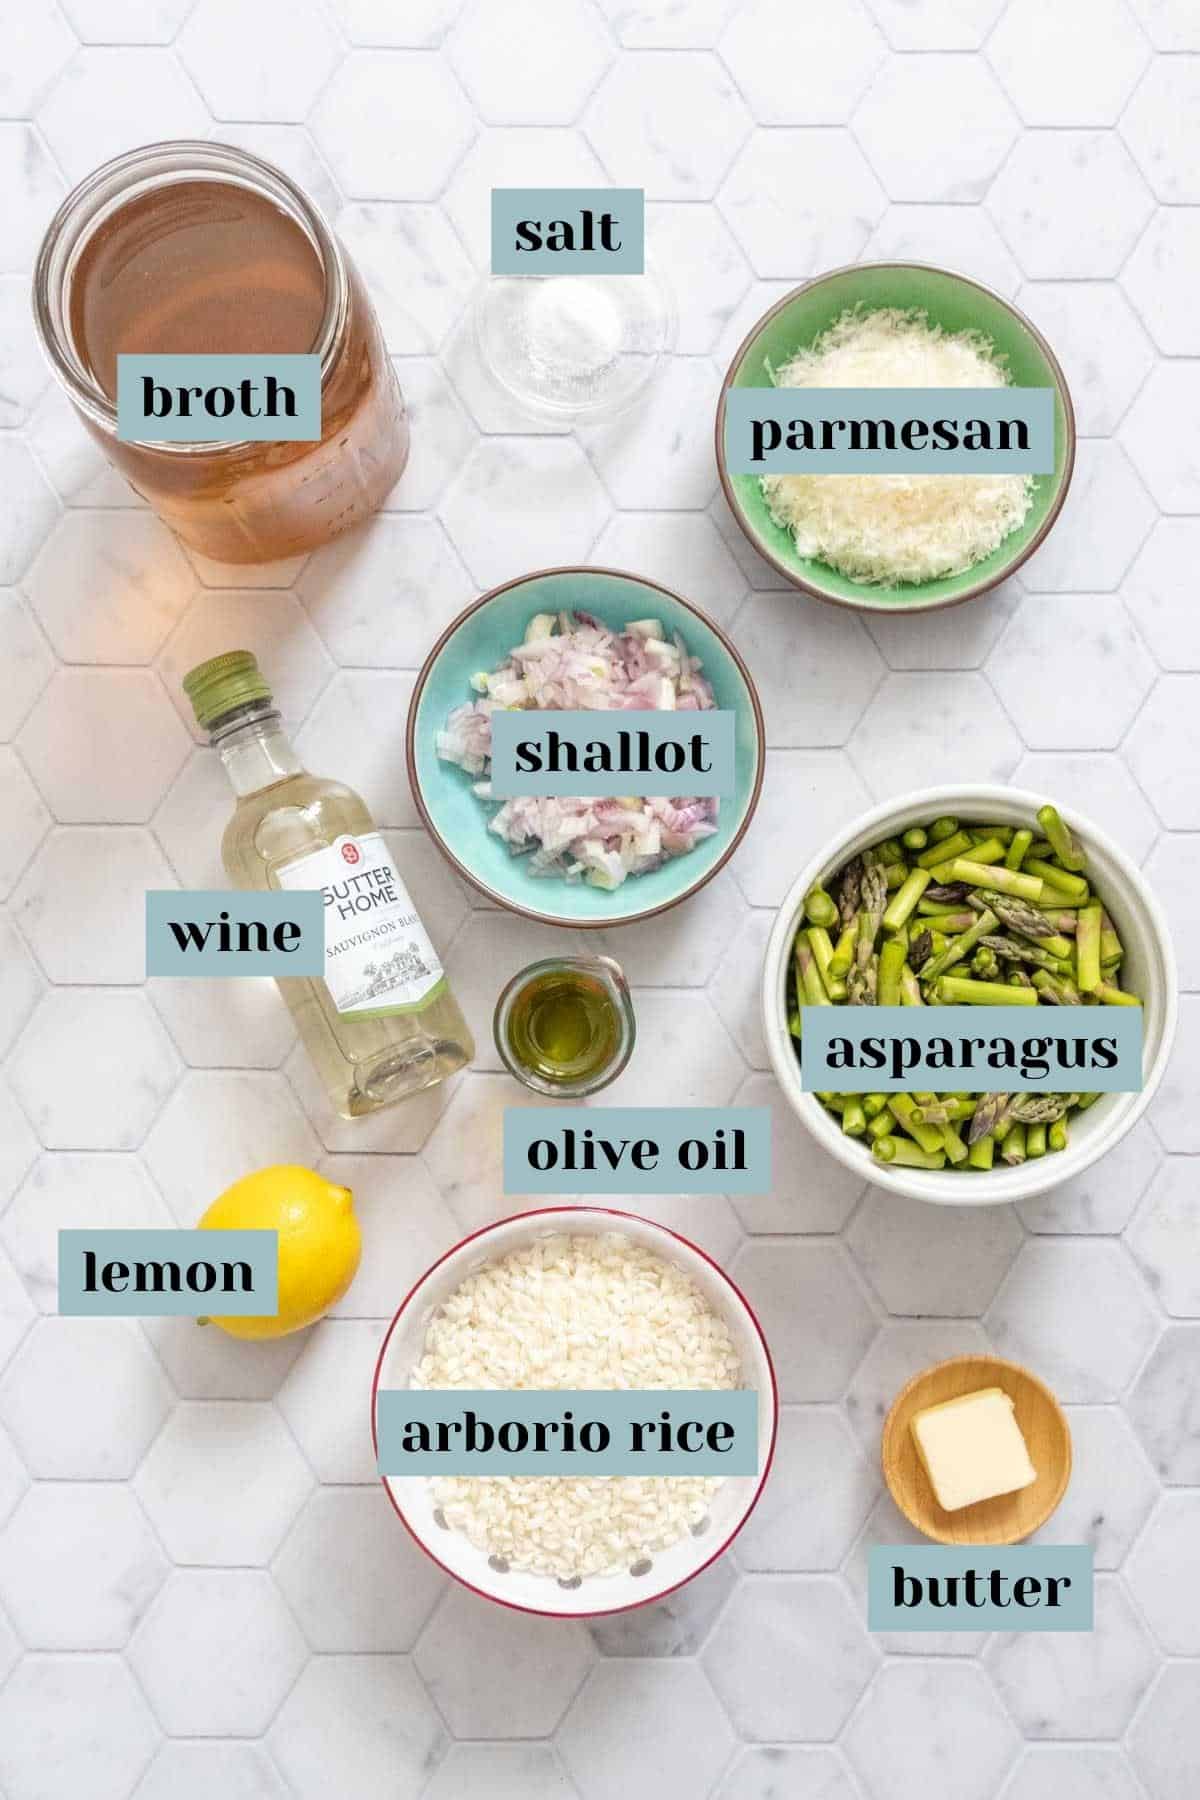 Ingredients for asparagus risotto on a tile surface with labels.